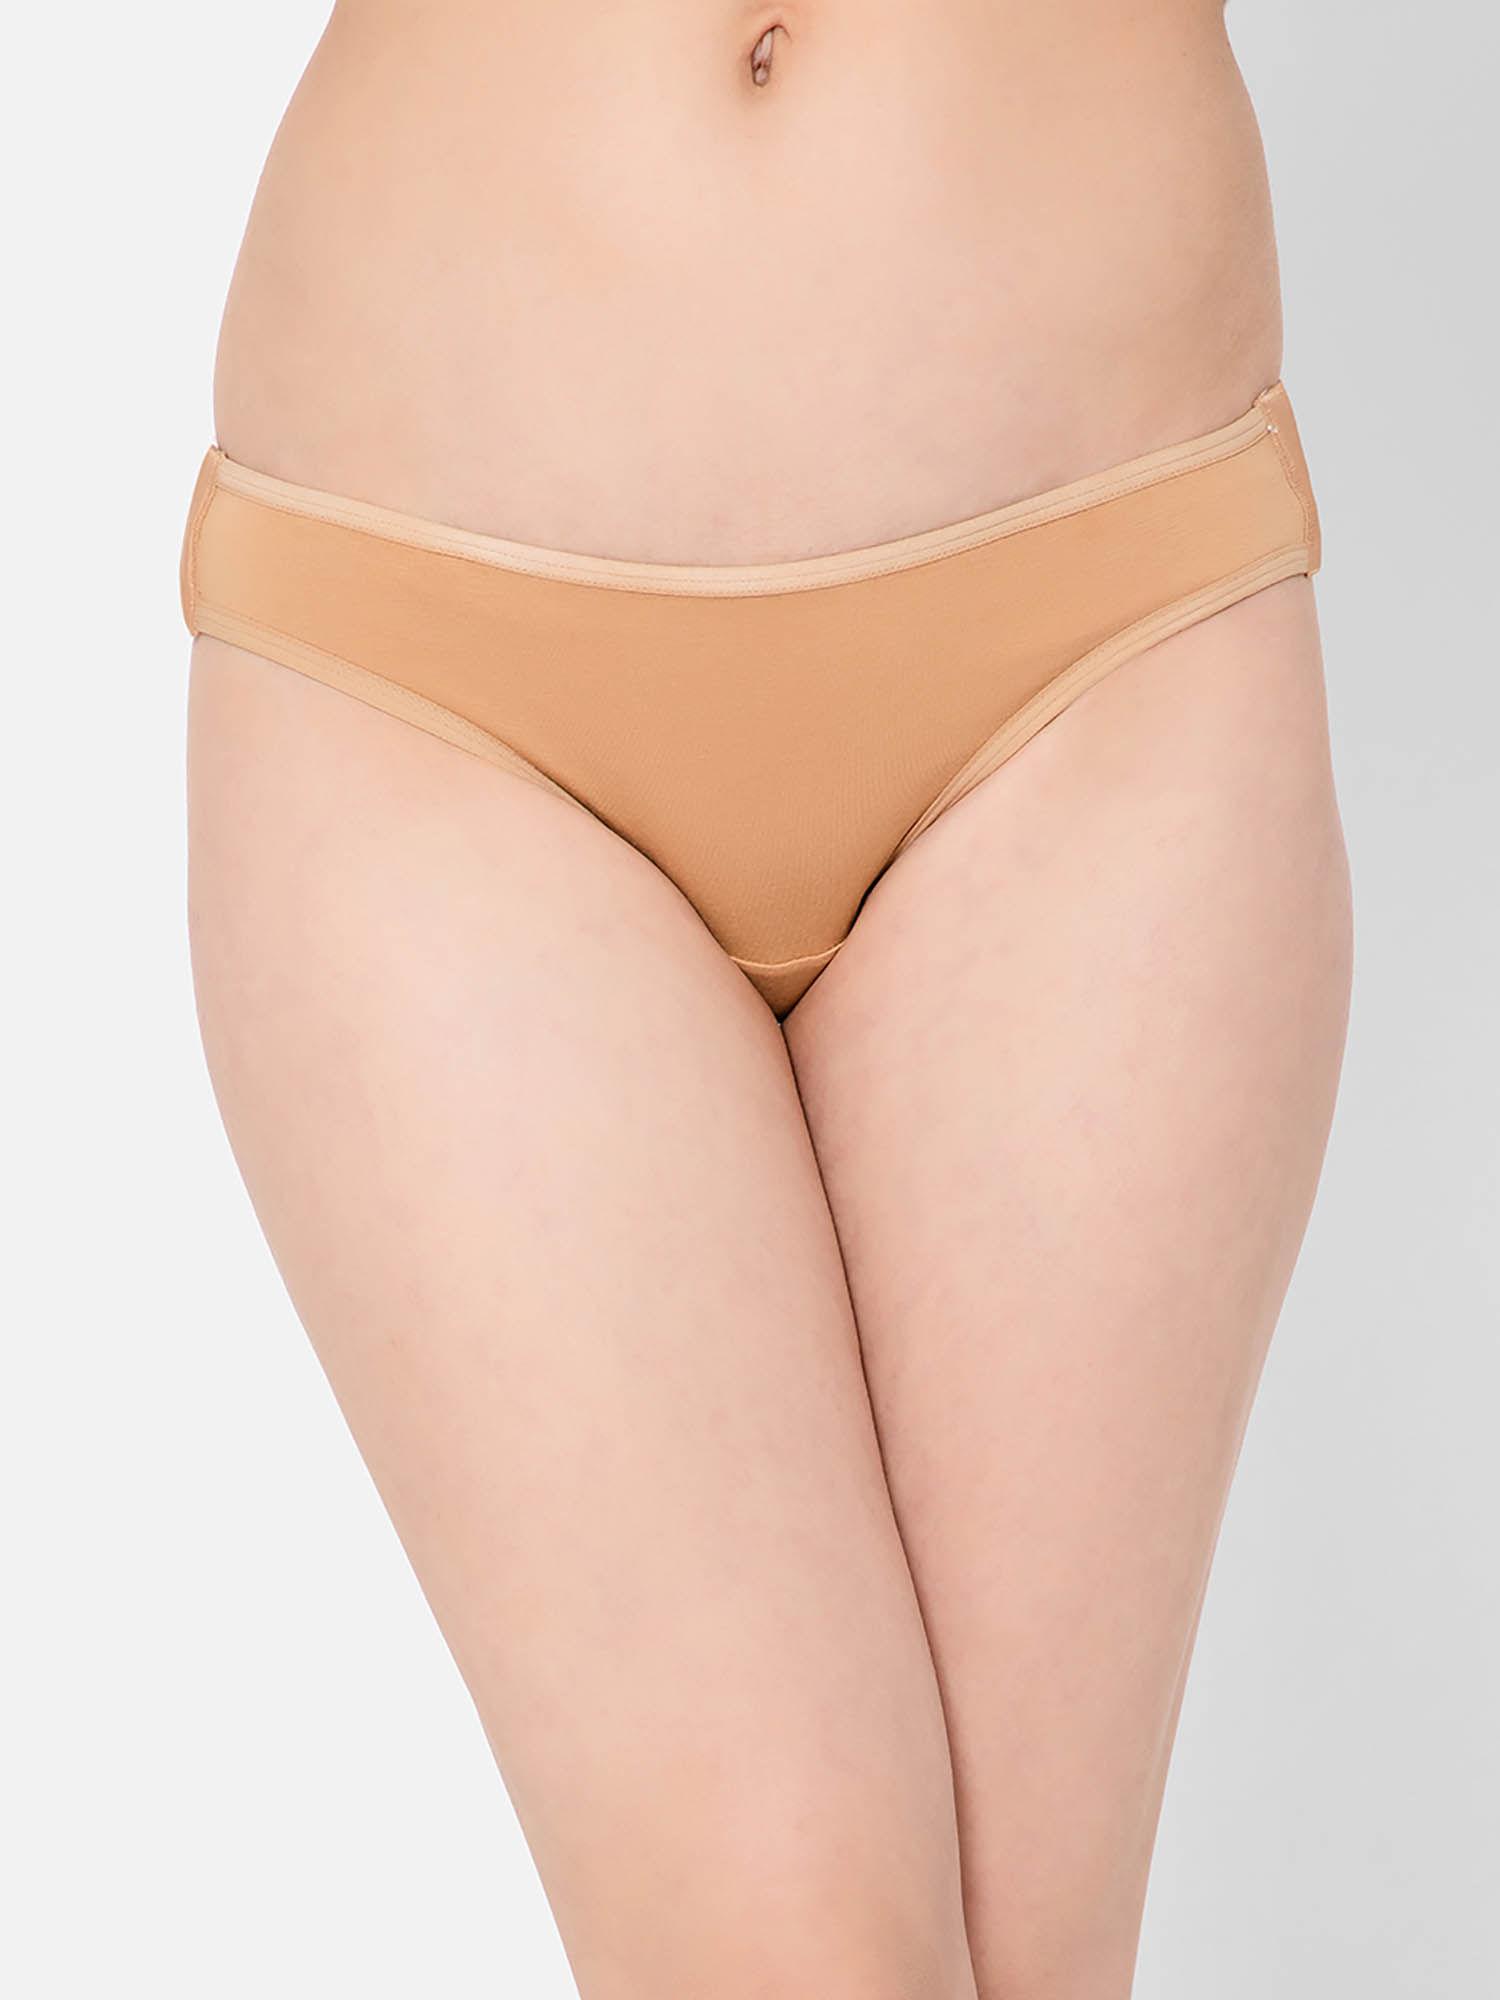 low waist leak-proof adult brief in nude colour with side hooks - cotton